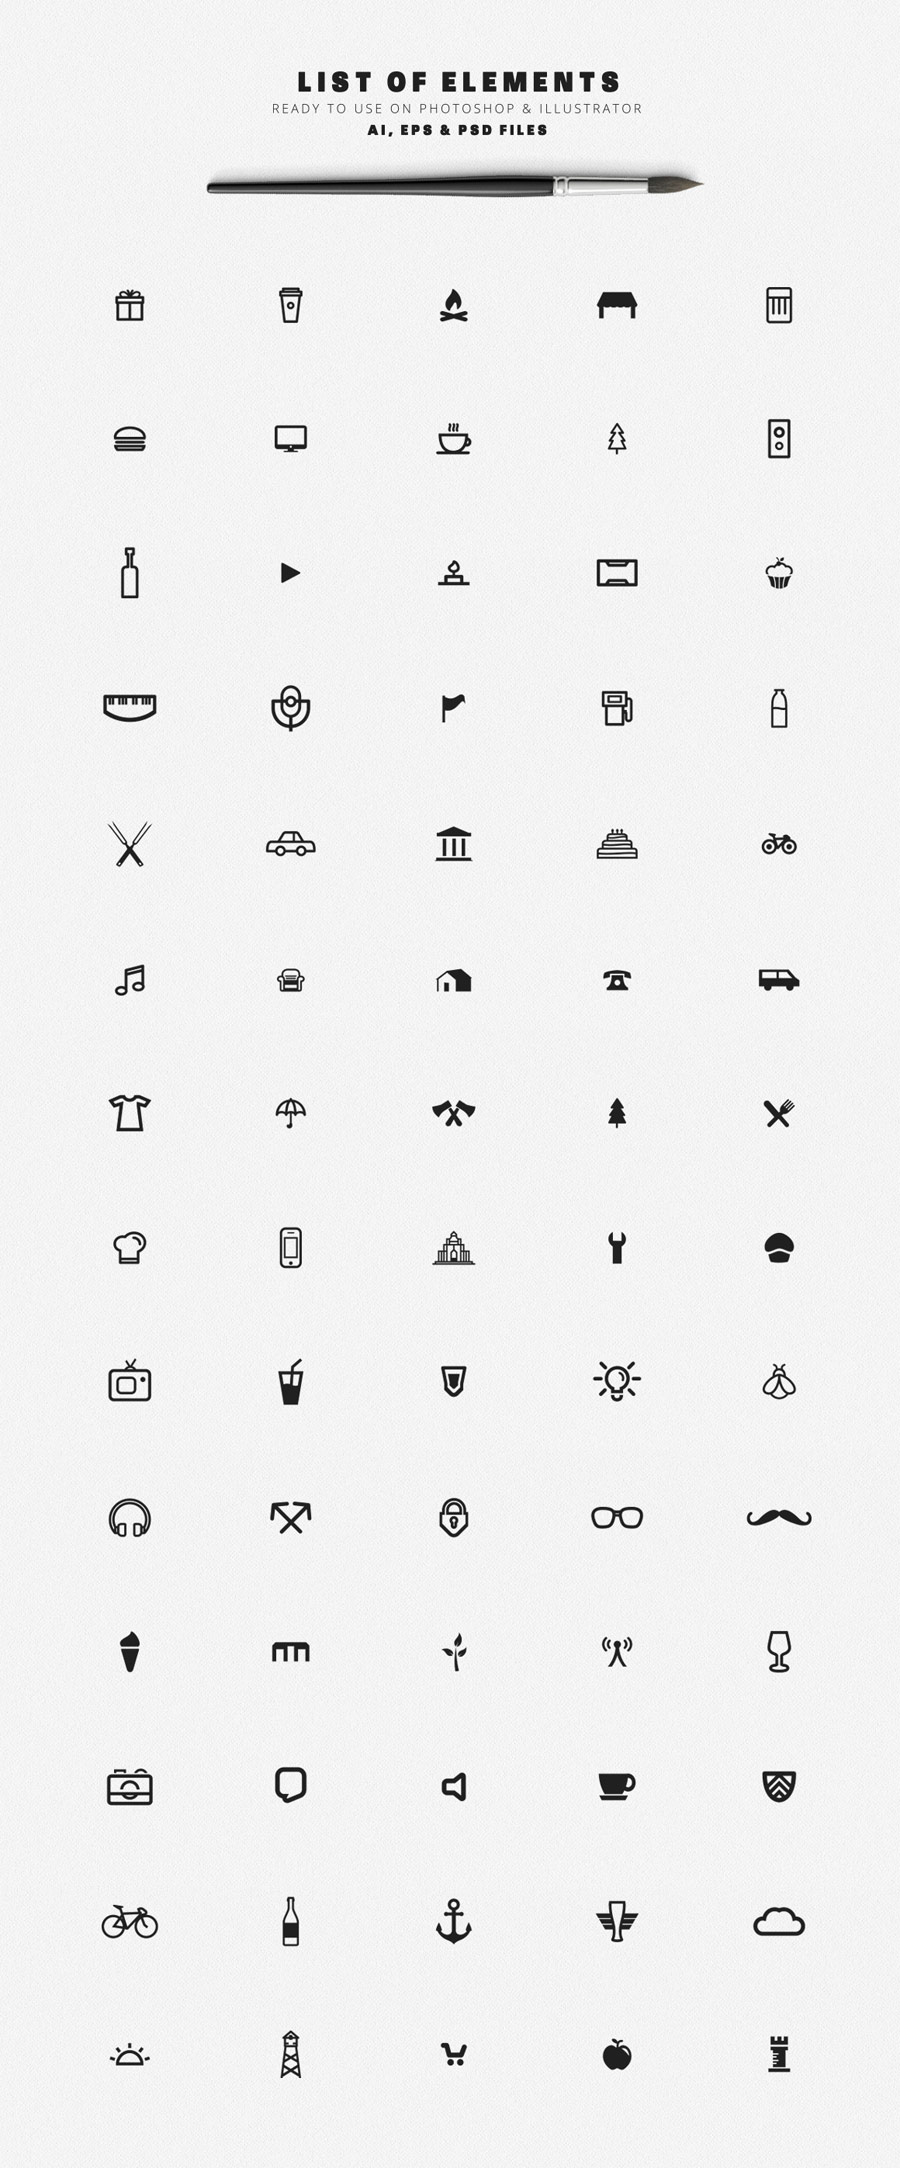 70 elements of diverse shapes and icons as Adobe Illusttrator, Photoshop, and EPS vector files.